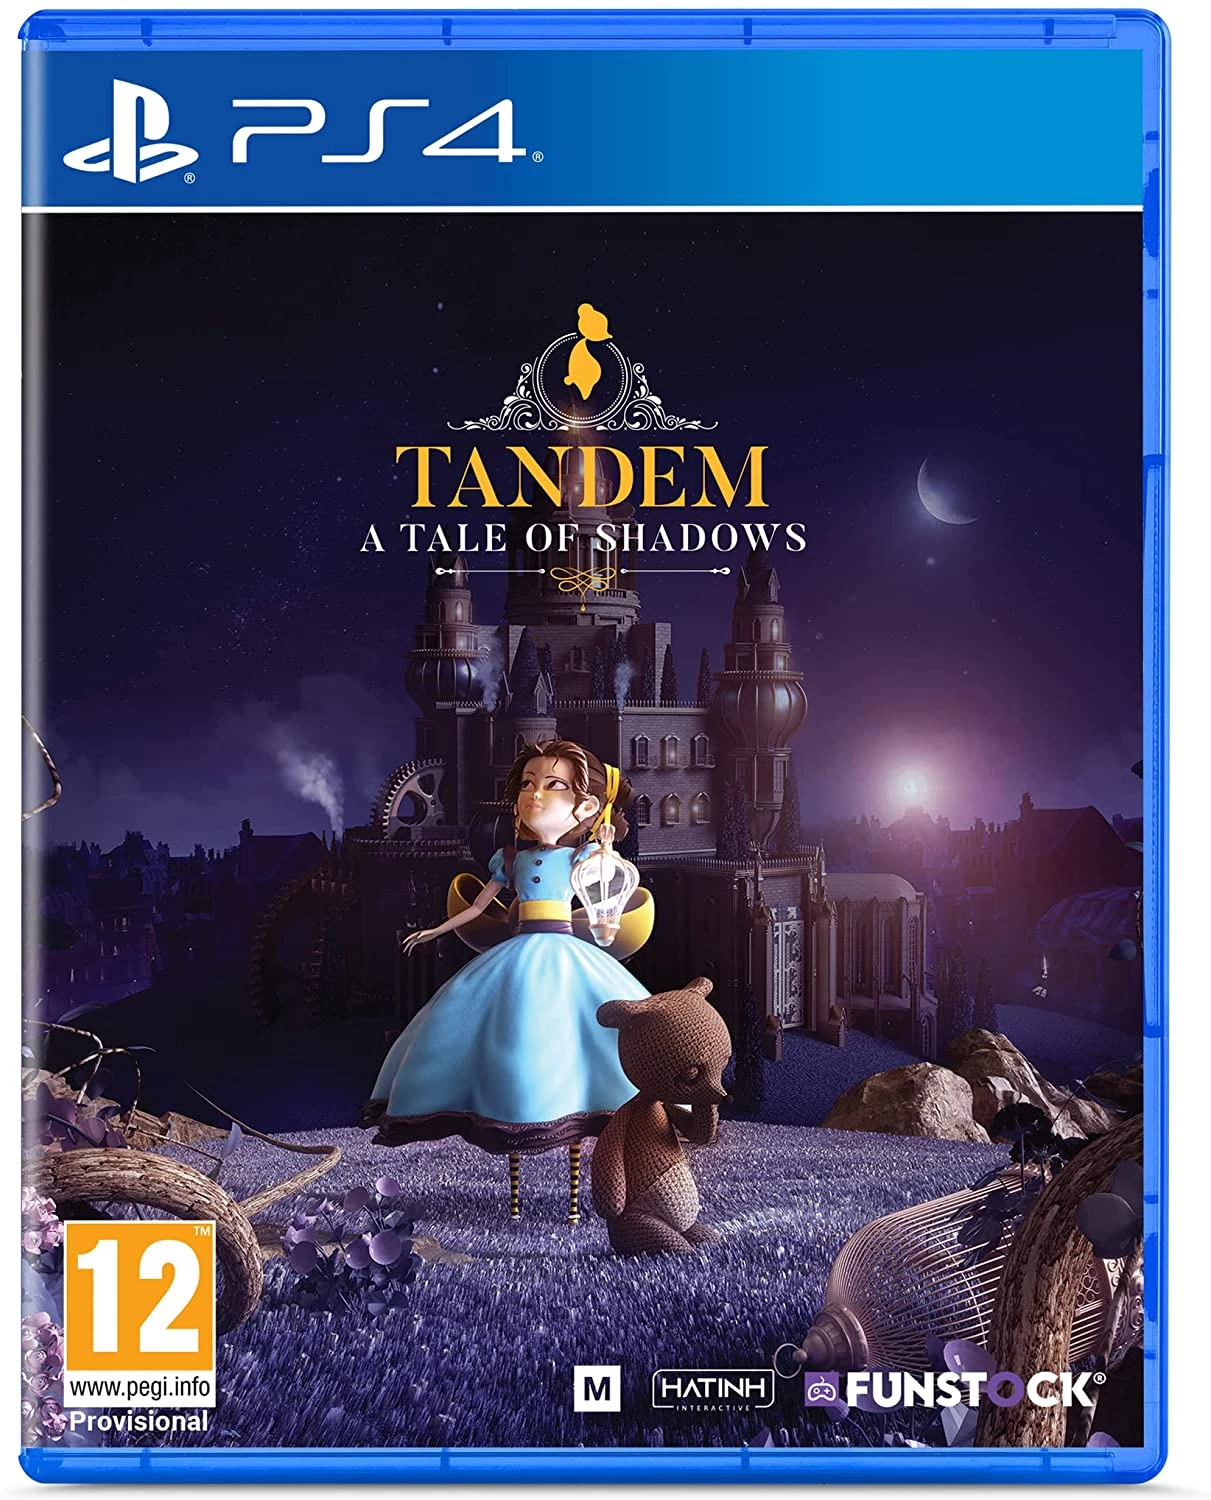 Tandem: A Tale of Shadows (PS4), Hatinh Interactive